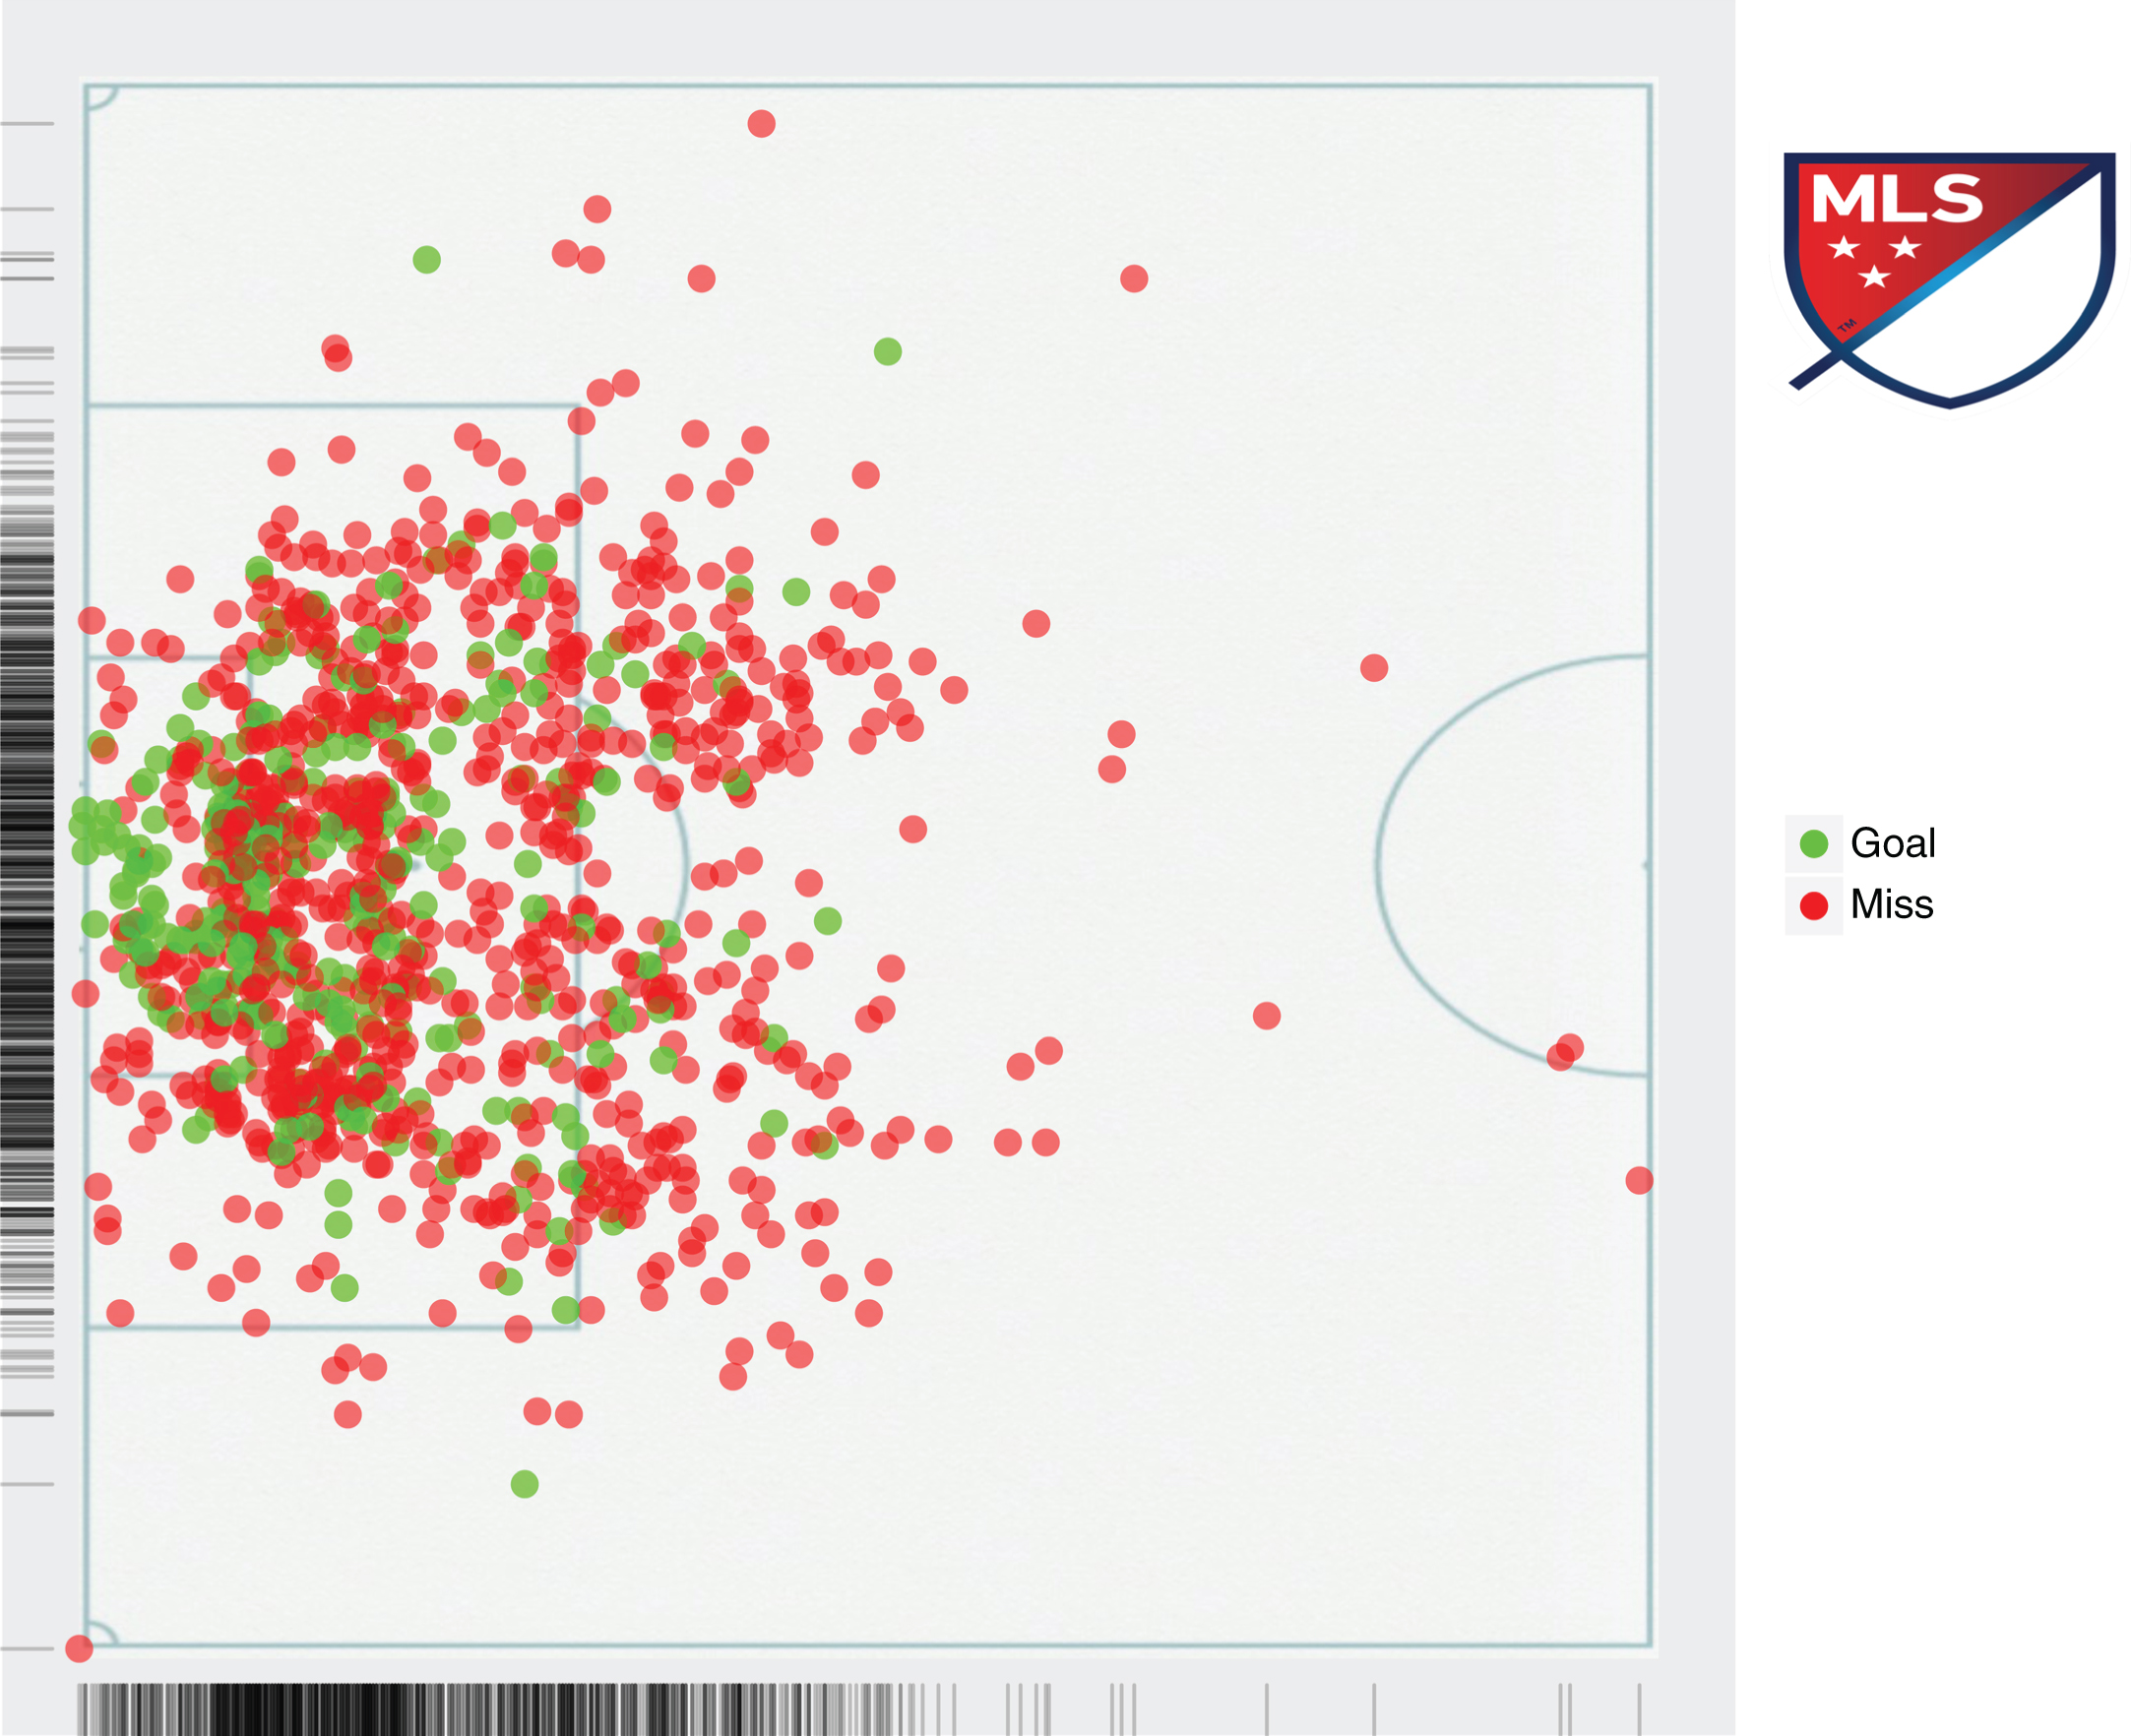 A shotchart of the shots used in our analysis.